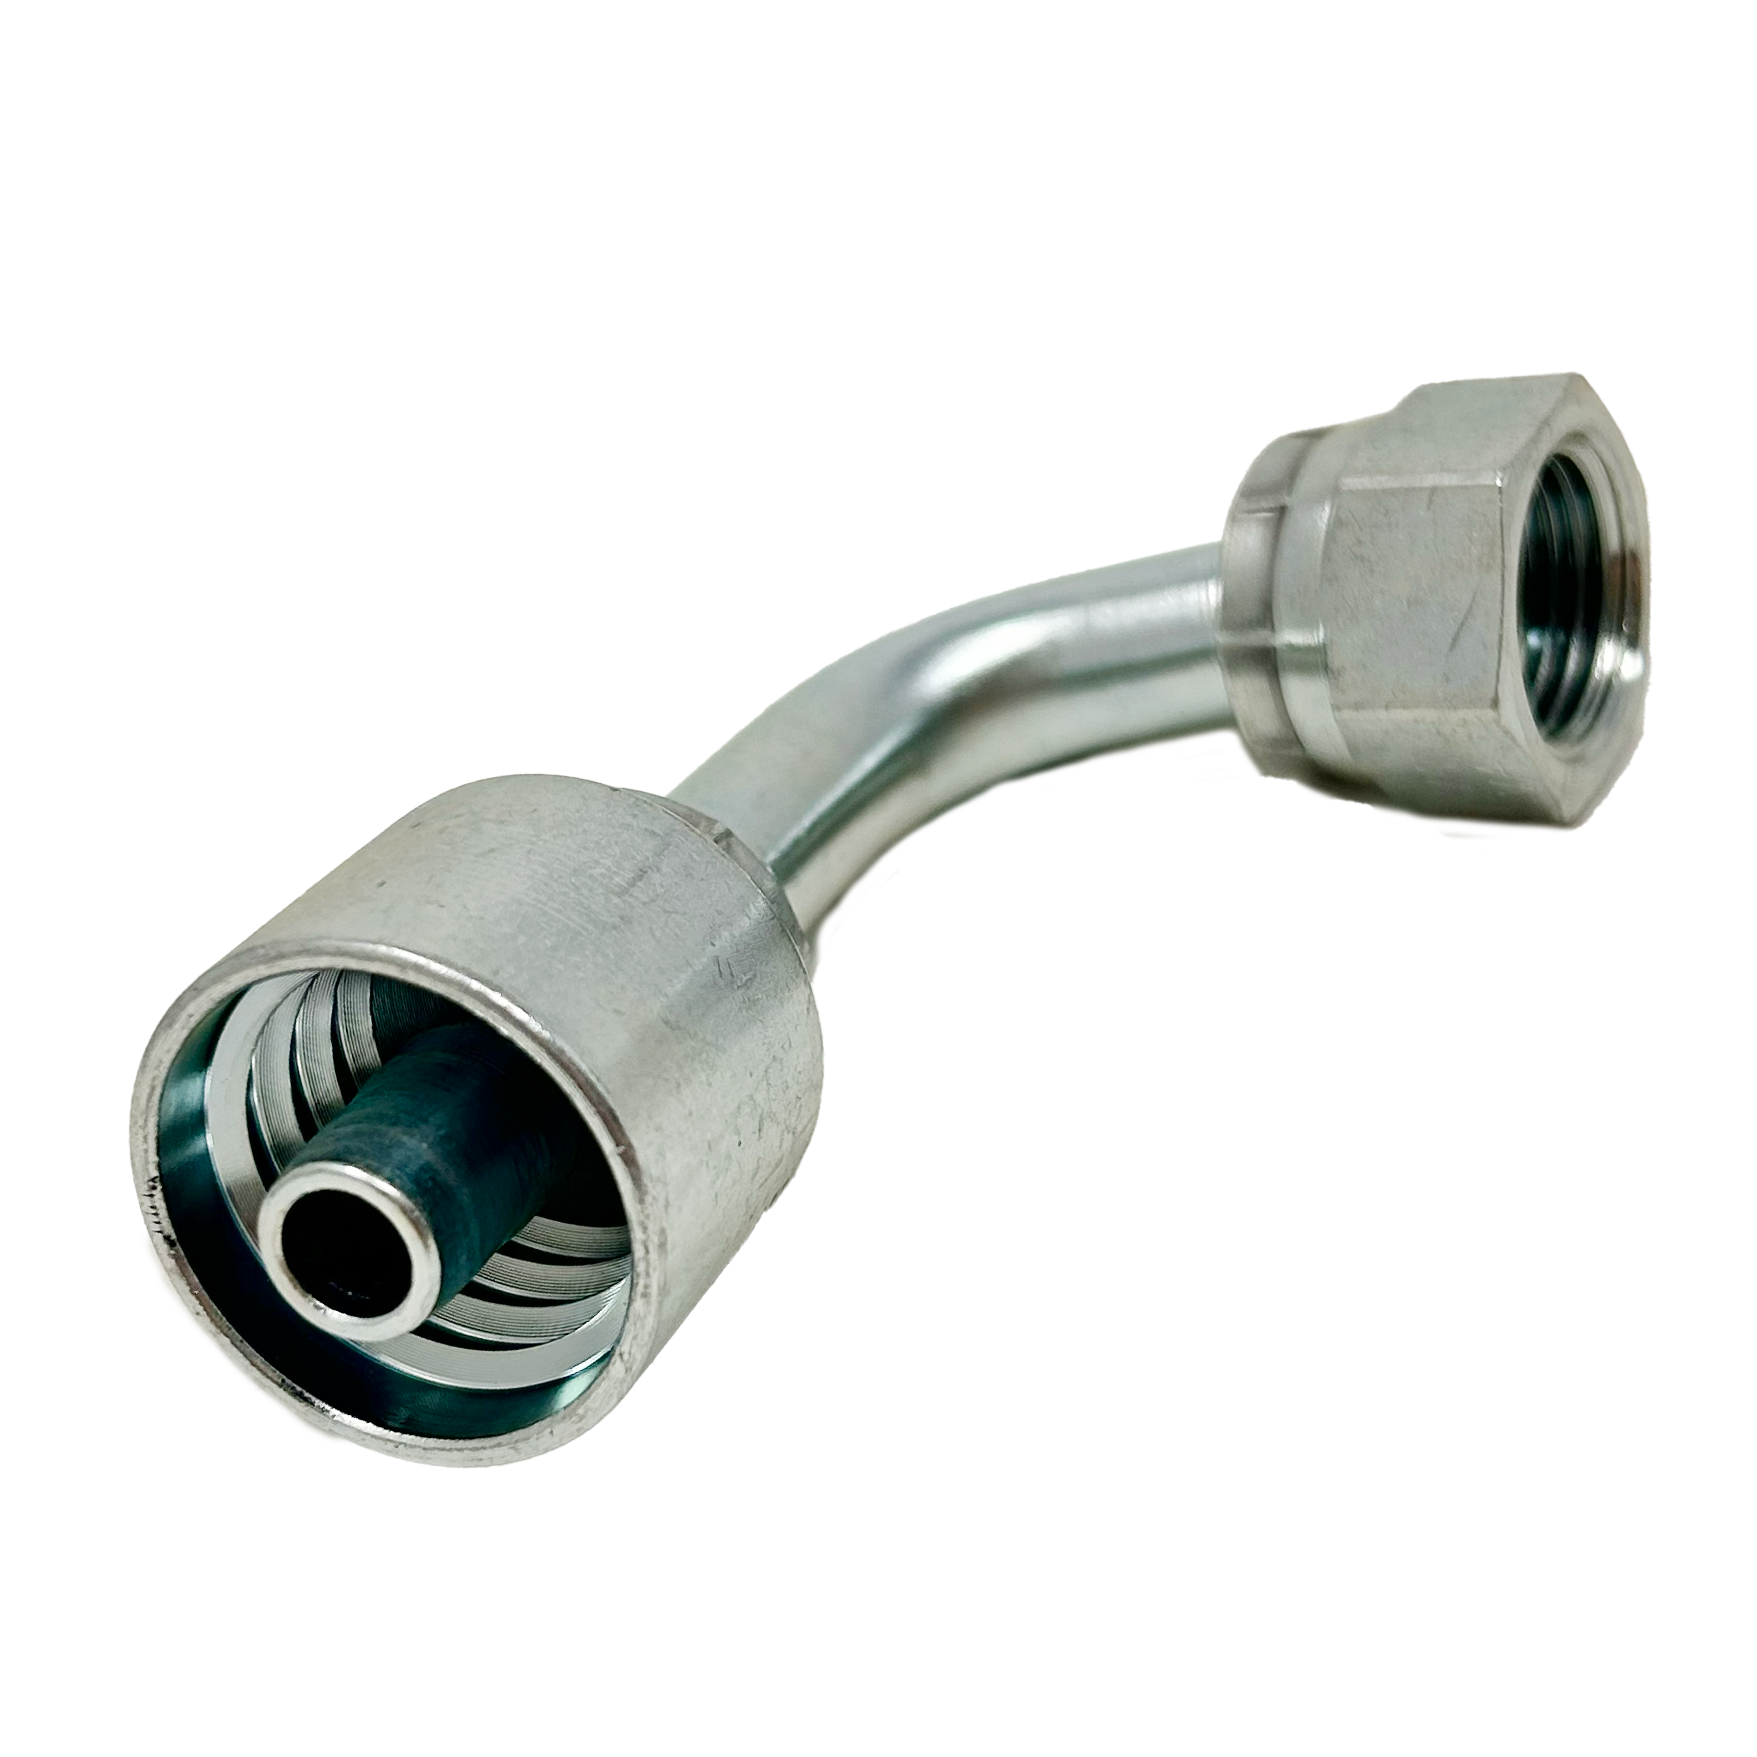 B2-OFFX90-0606: Continental Hose Fitting, 0.375 (3/8") Hose ID x 11/16-16 Female ORFS, 90-Degree Swivel Connection